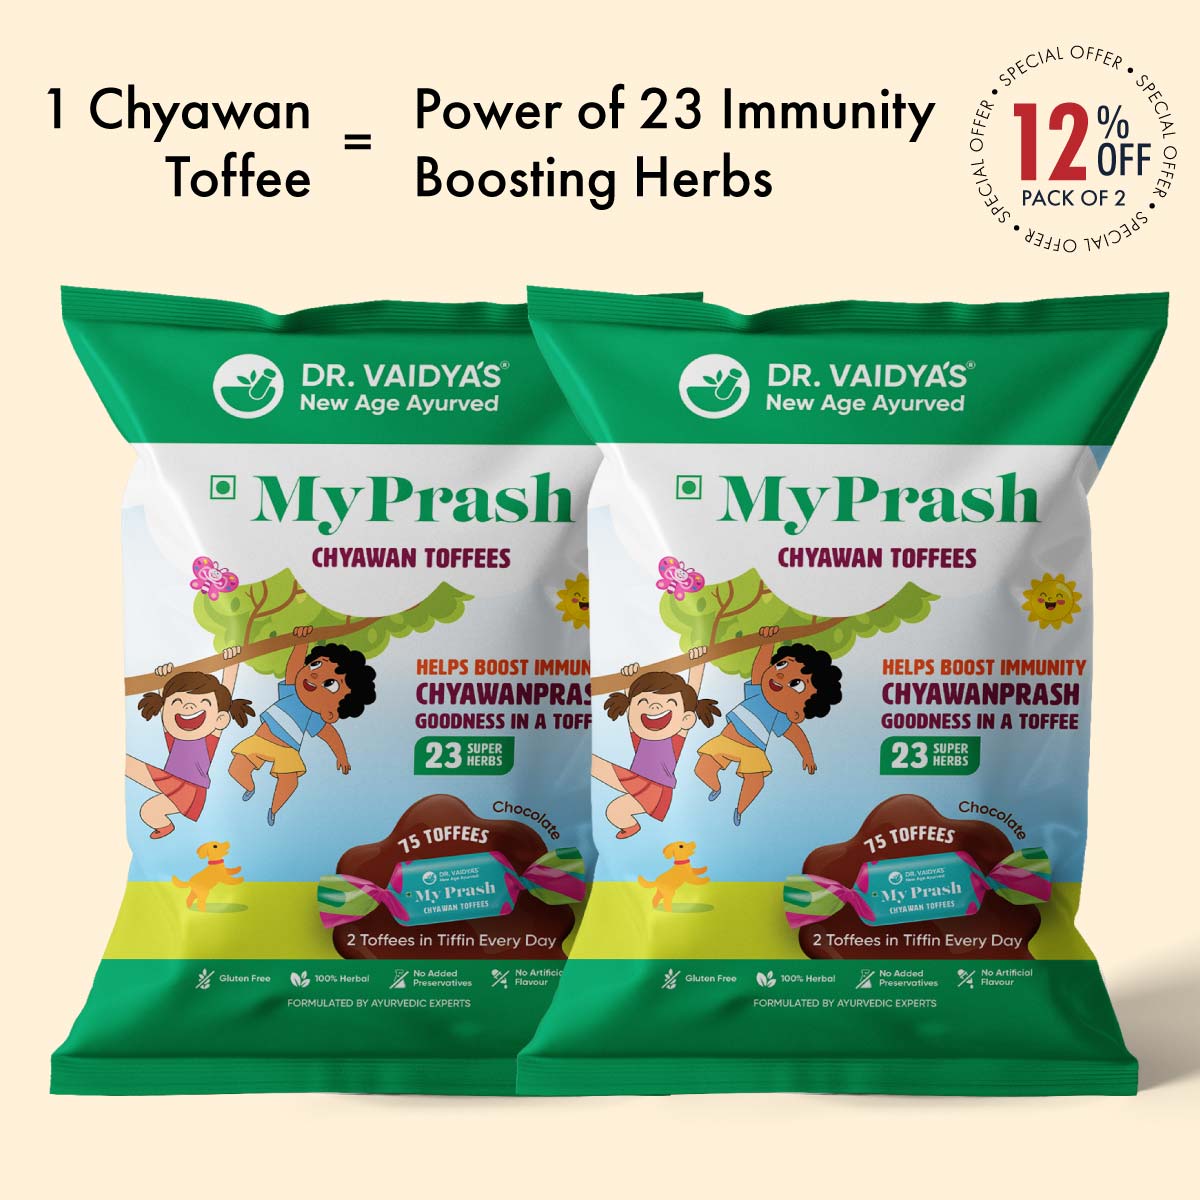 Chyawan Toffees: Goodness Of Chyawanprash In A Toffee